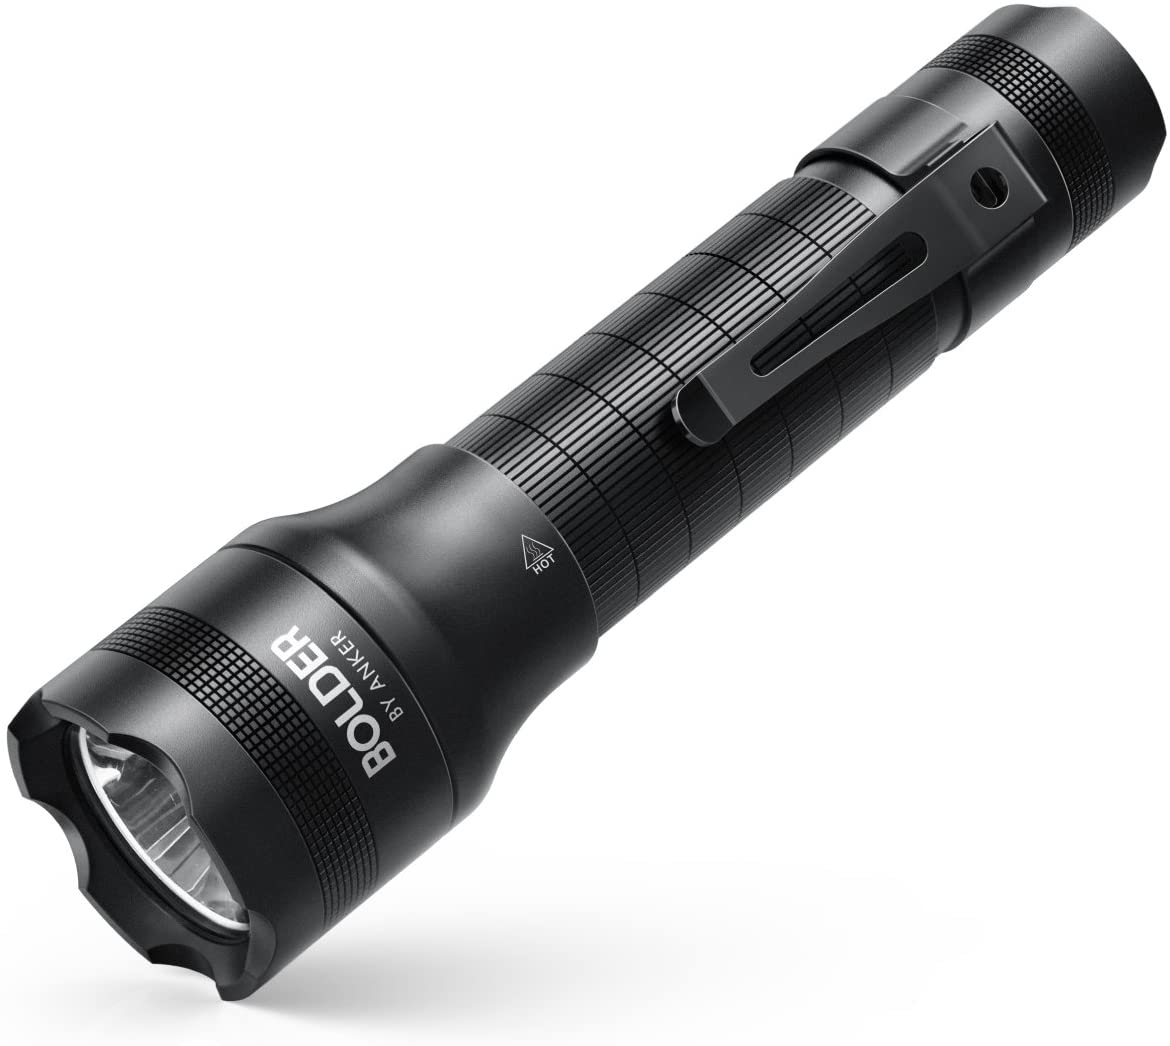 SAVE 35% OFF on Anker Rechargeable Bolder LC40 Flashlight $19.49 +FS